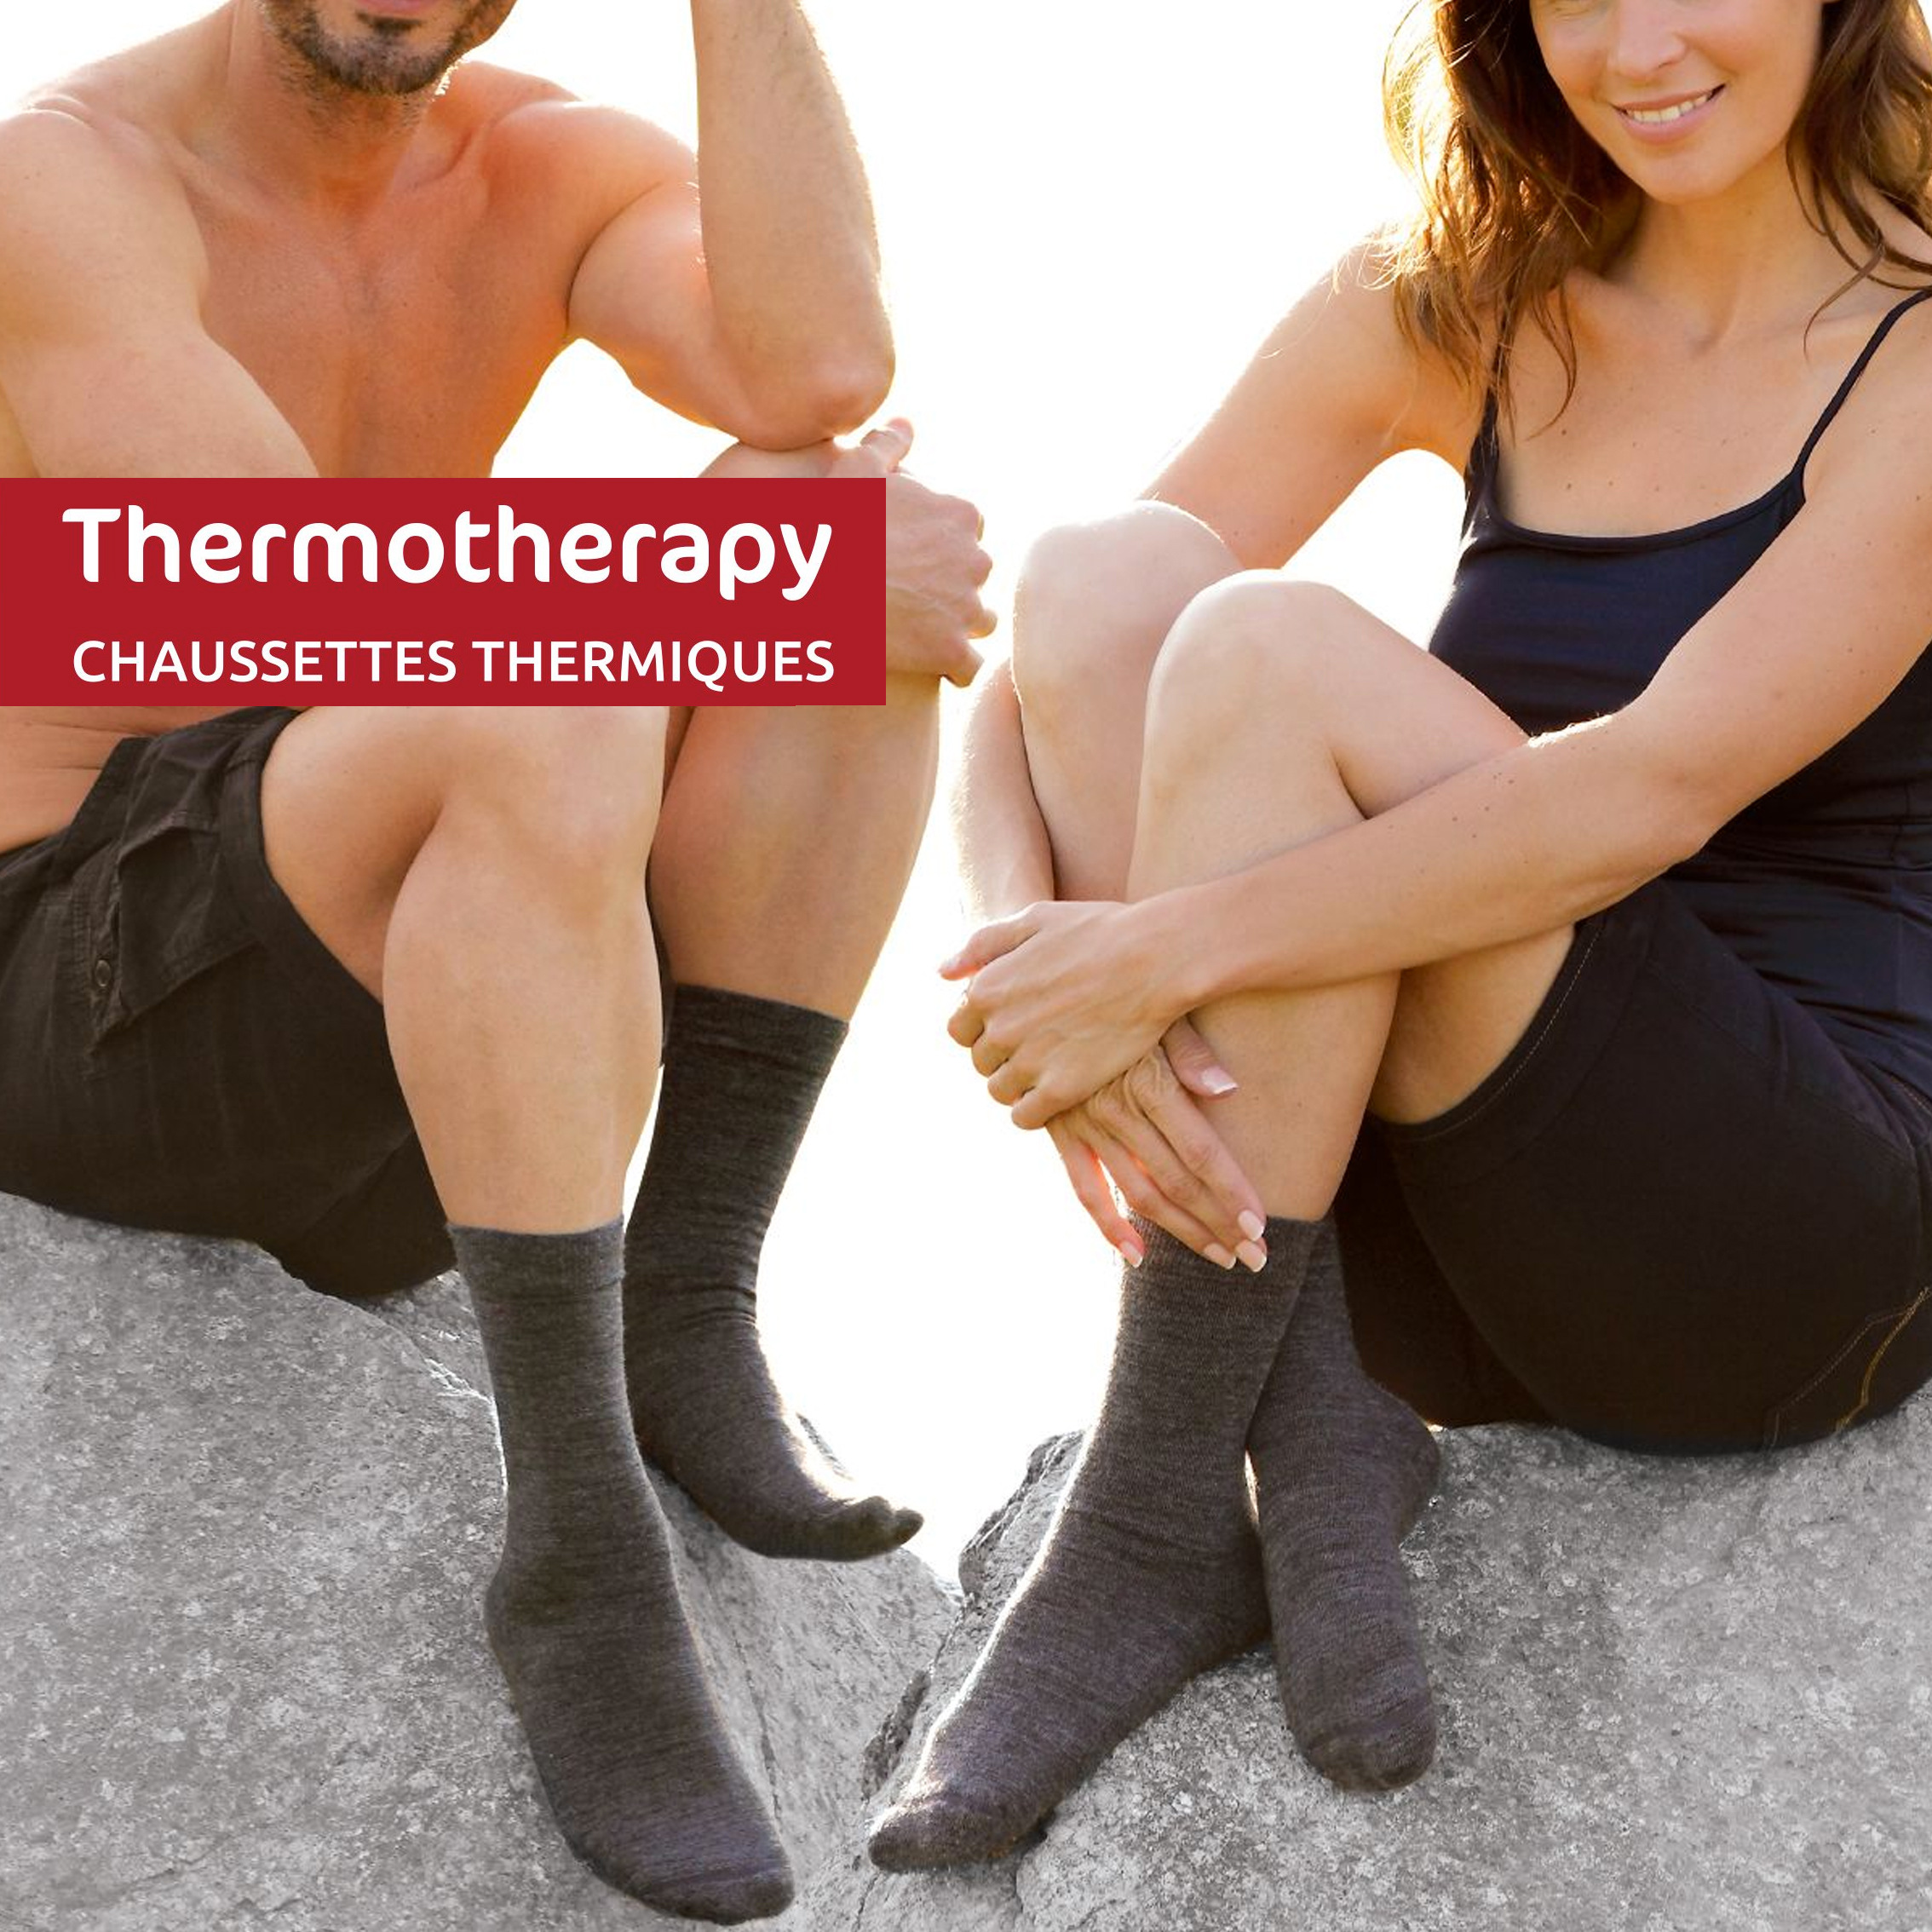 https://cdn.pharmaciedesdrakkars.com/media/images/products/gibaud-chaussettes-thermique-2-1511443373.jpg